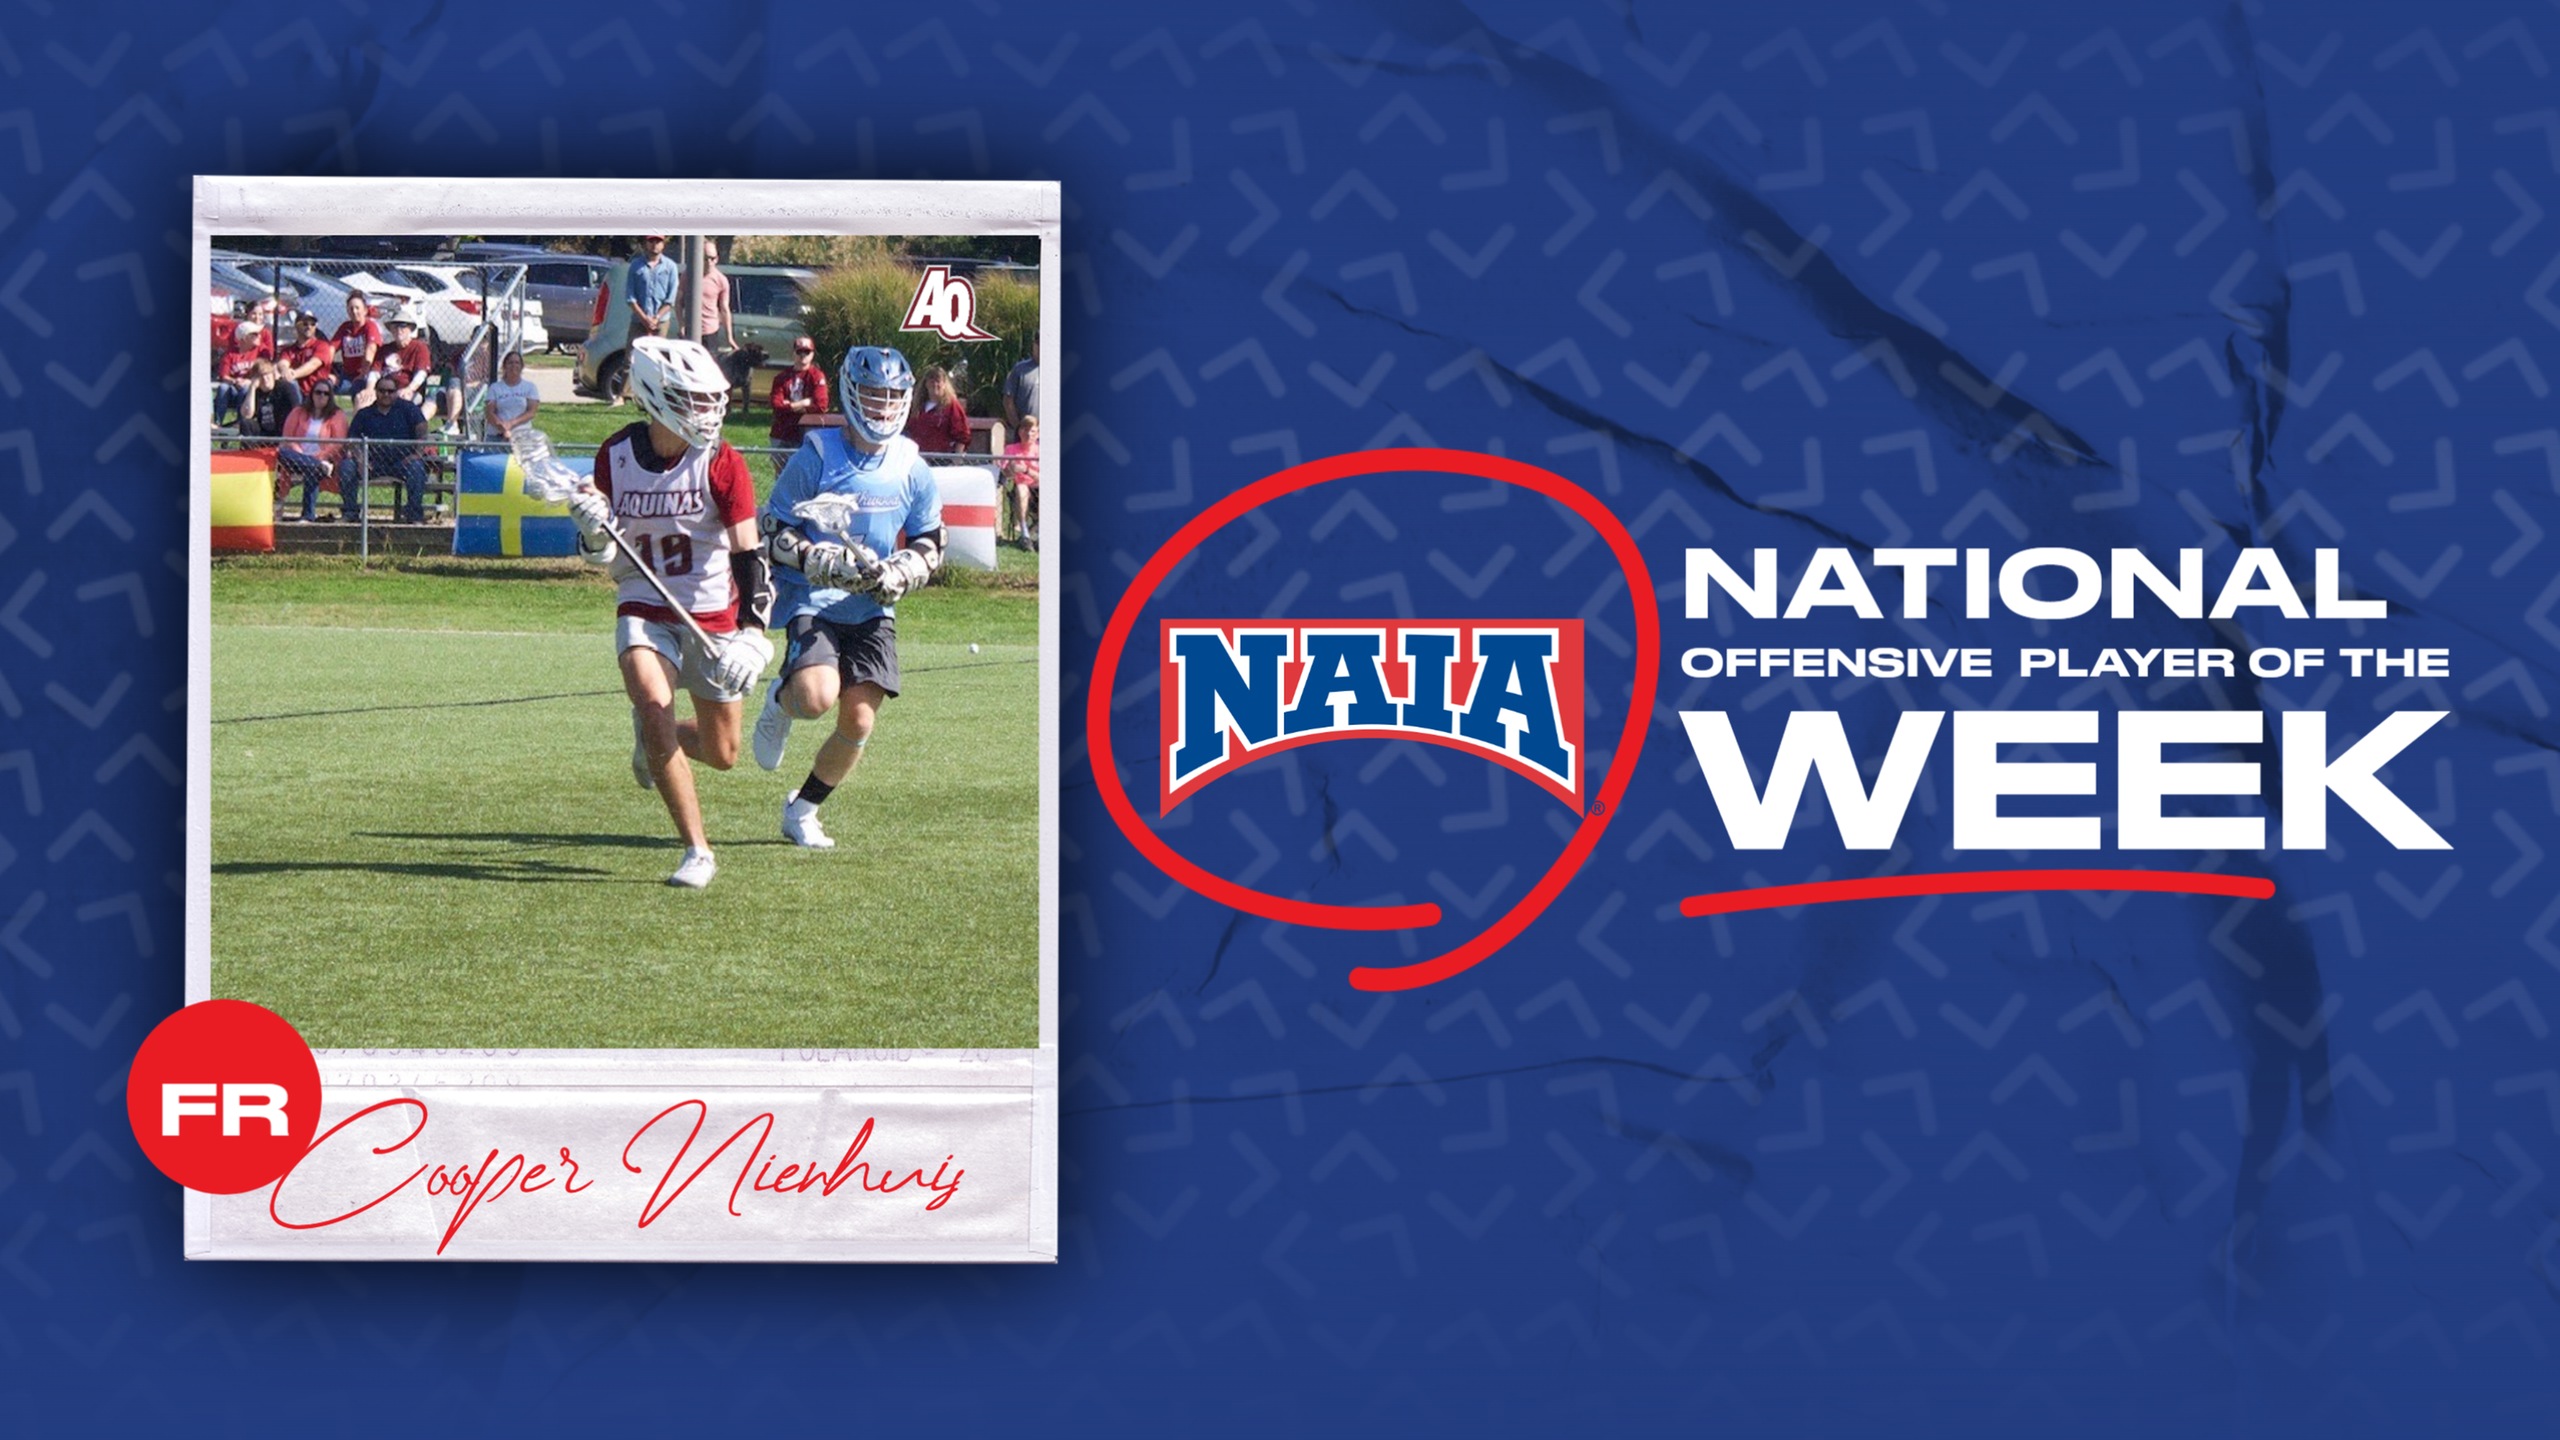 Aquinas' Nienhuis Named NAIA Offensive Player of the Week